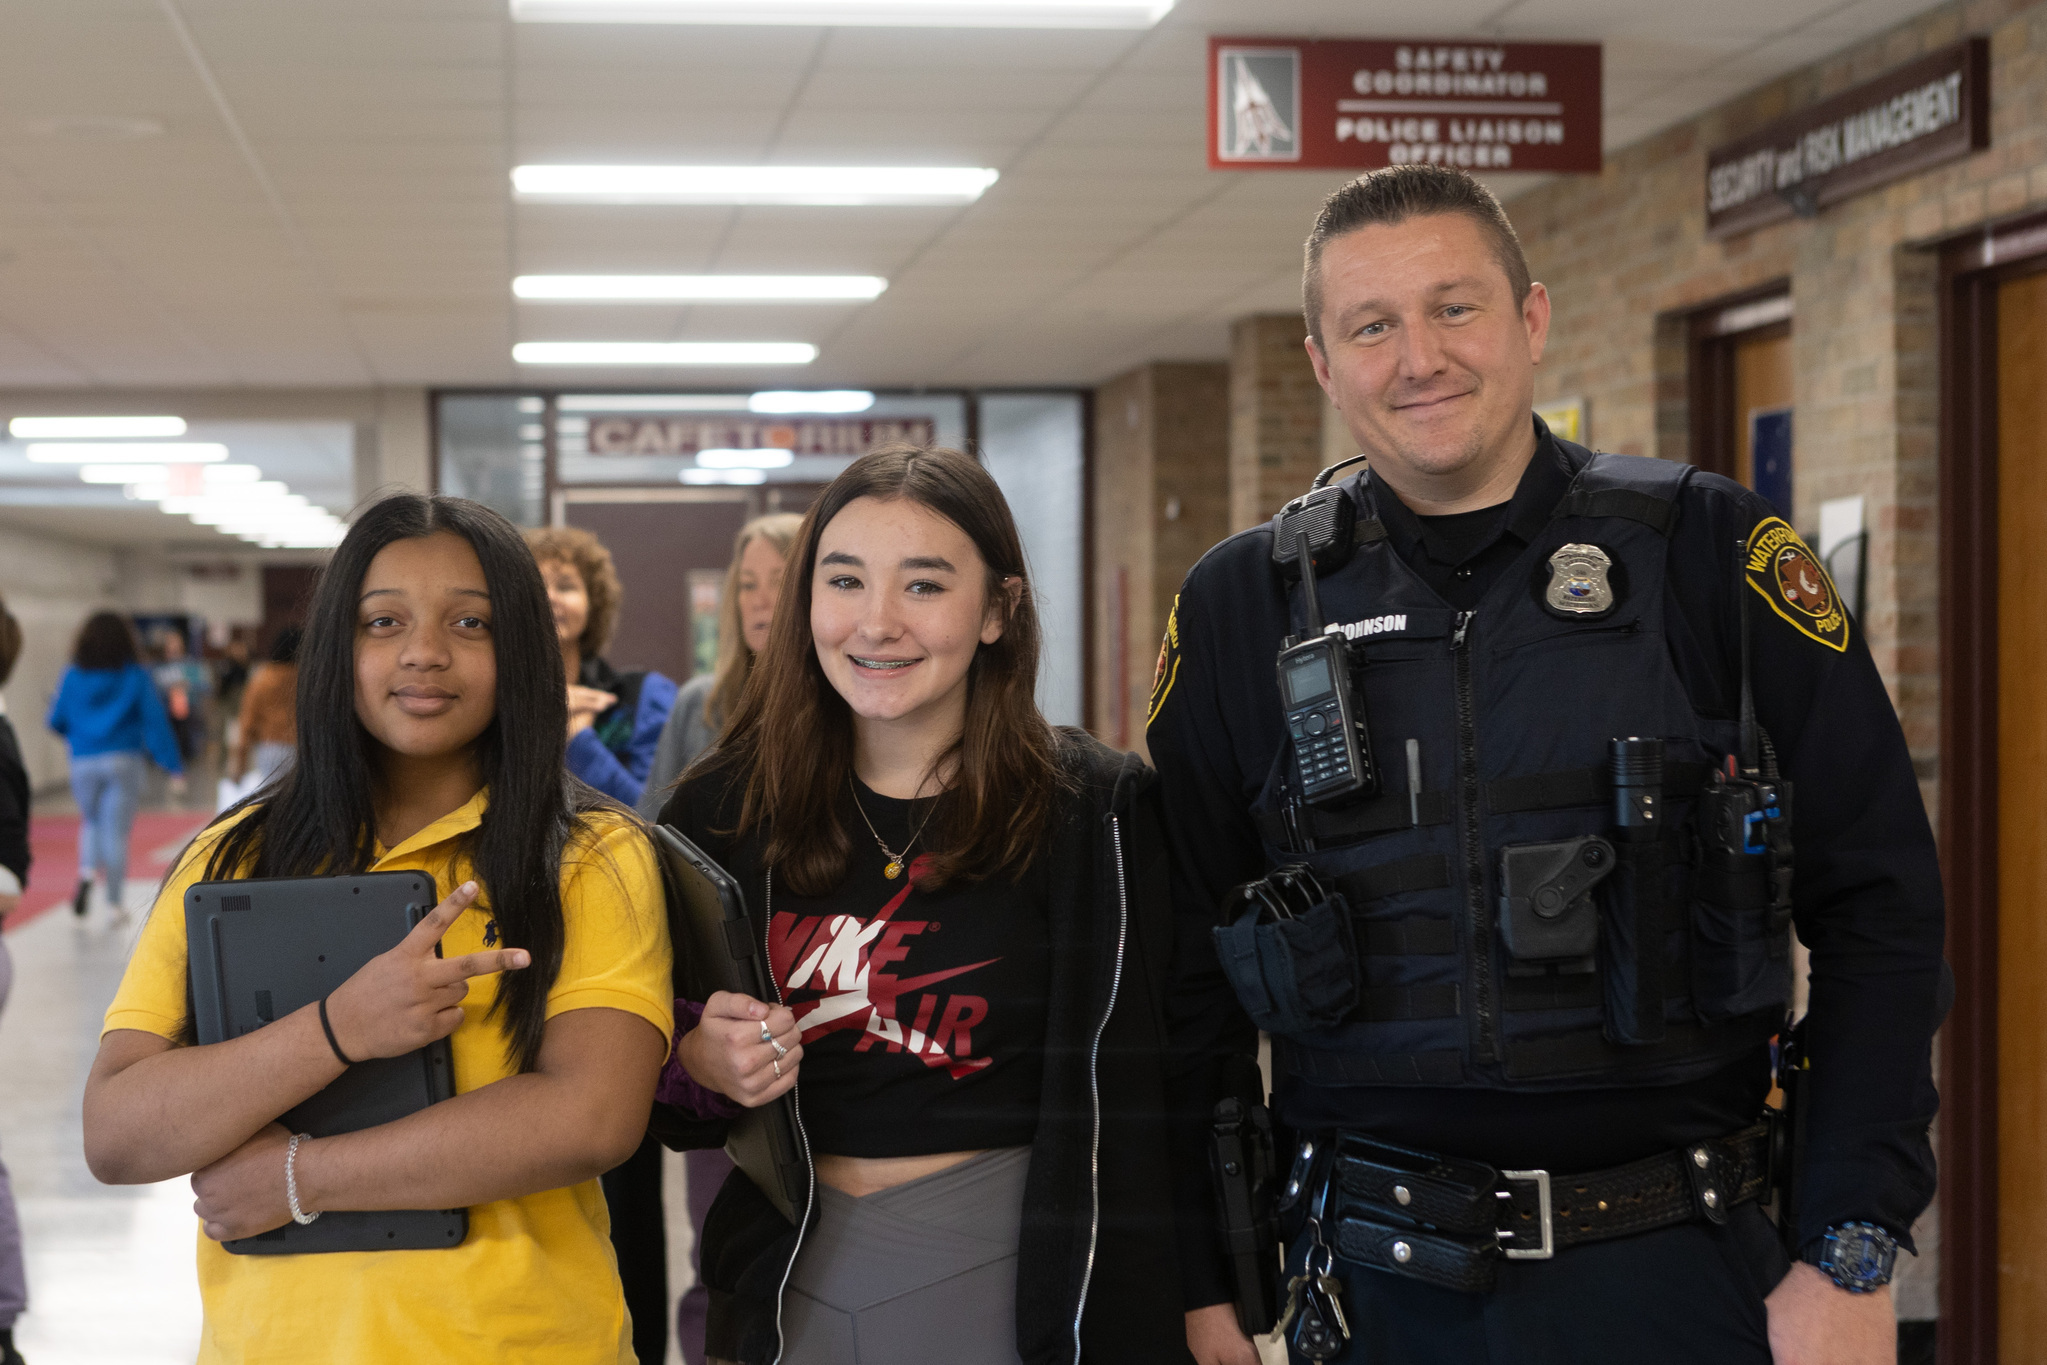 Mason School Resource Officer with Students